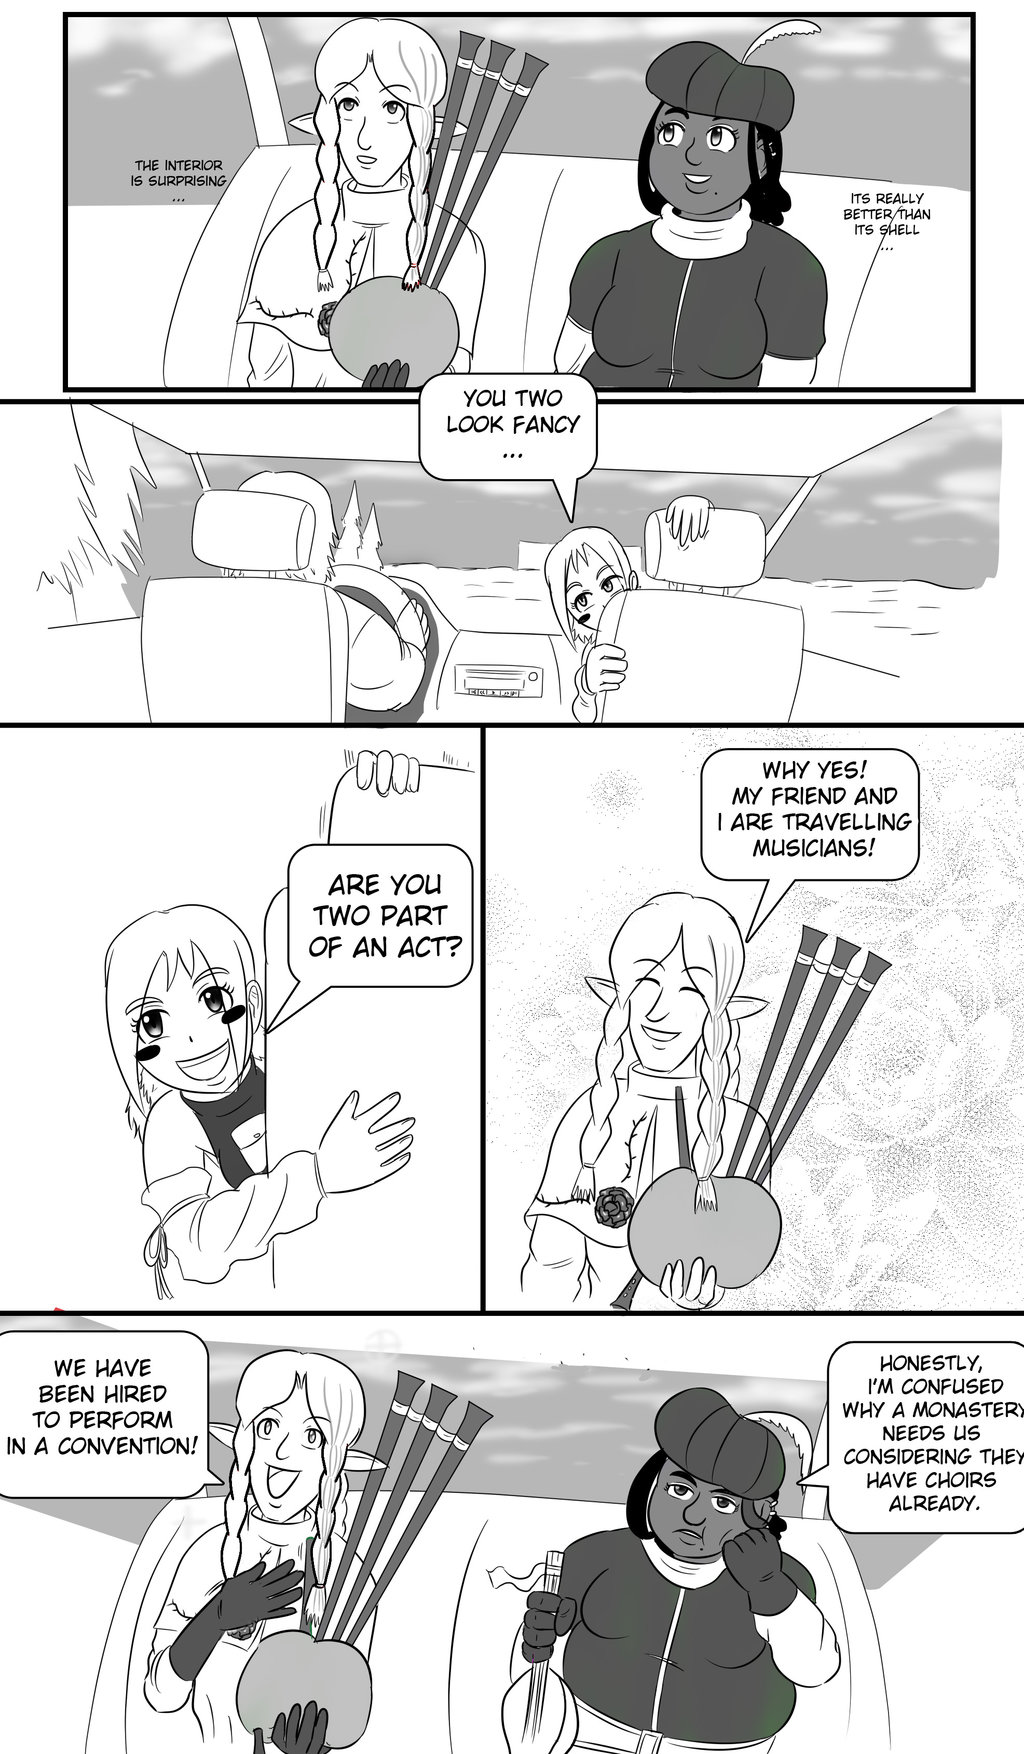 Court of Roses Page 3 by Maxis-Geryon